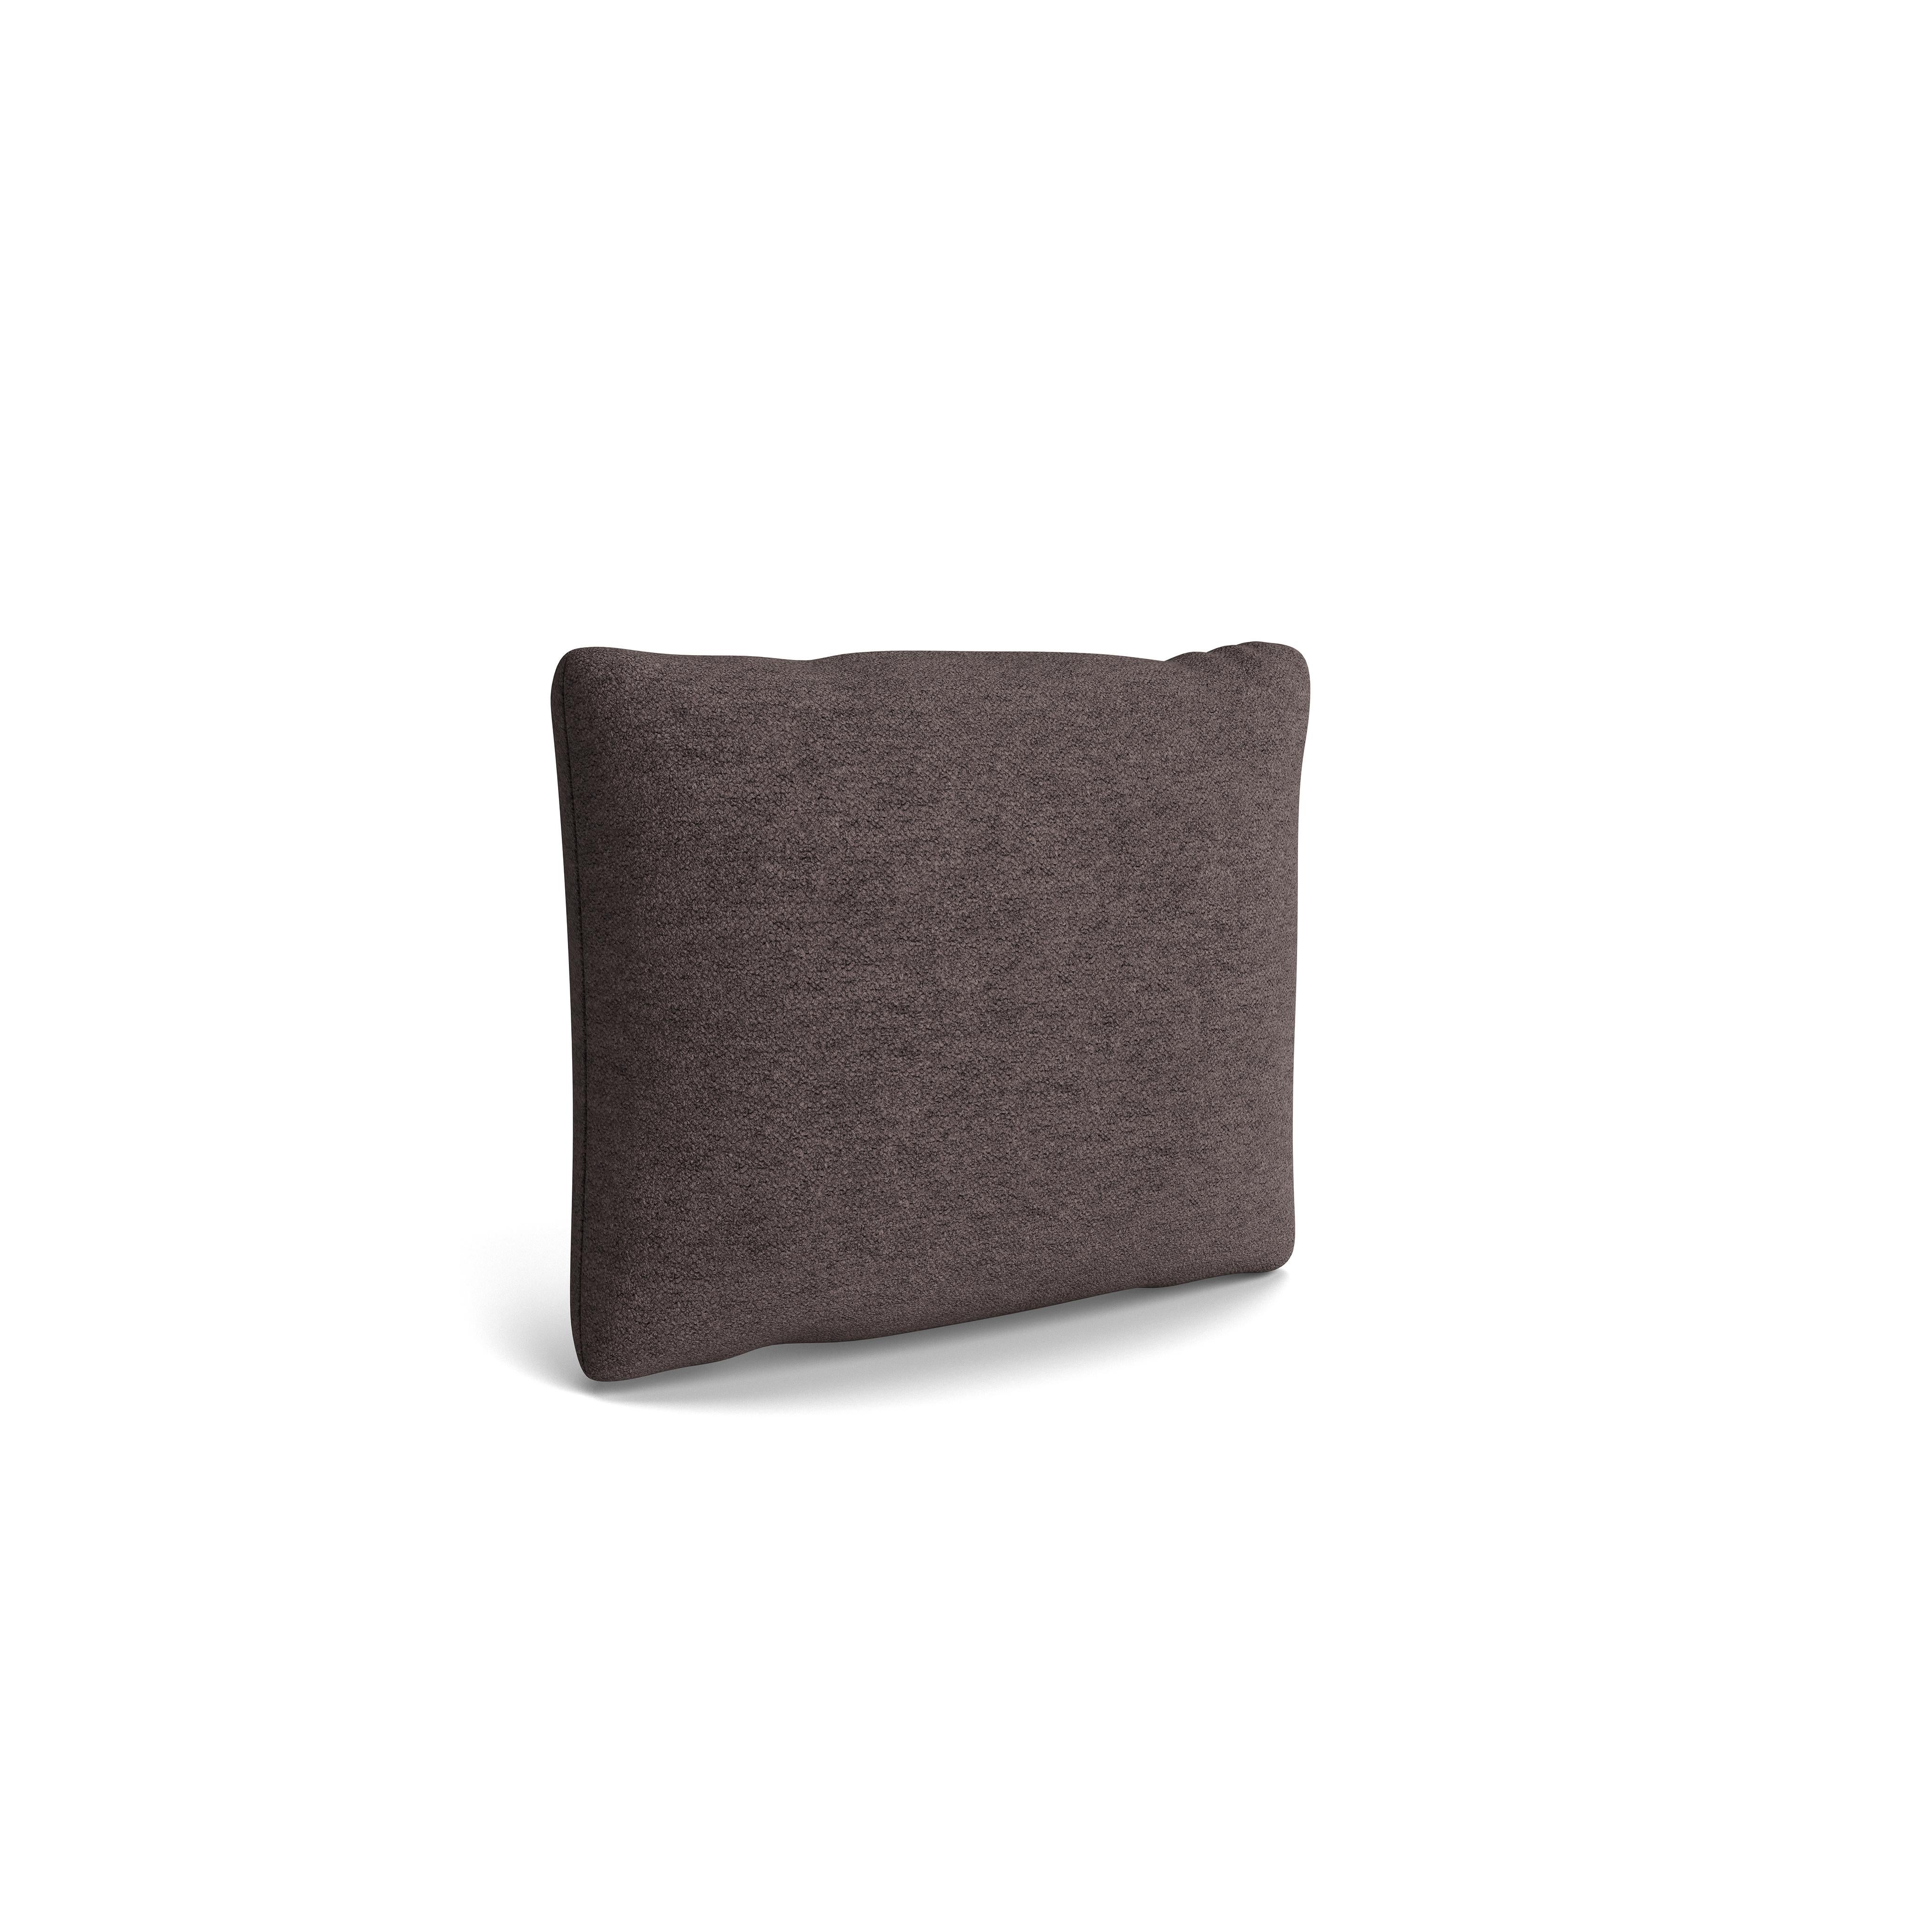 Riff Small Cushion by NORR11
Dimensions: W 50 x H 40 cm.
Materials: Foam and upholstery.
Upholstery: Barnum Boucle Color 3.

Available in different upholstery options. Prices may vary.  Please contact us. 

The Riff Sofa is a study on the classic